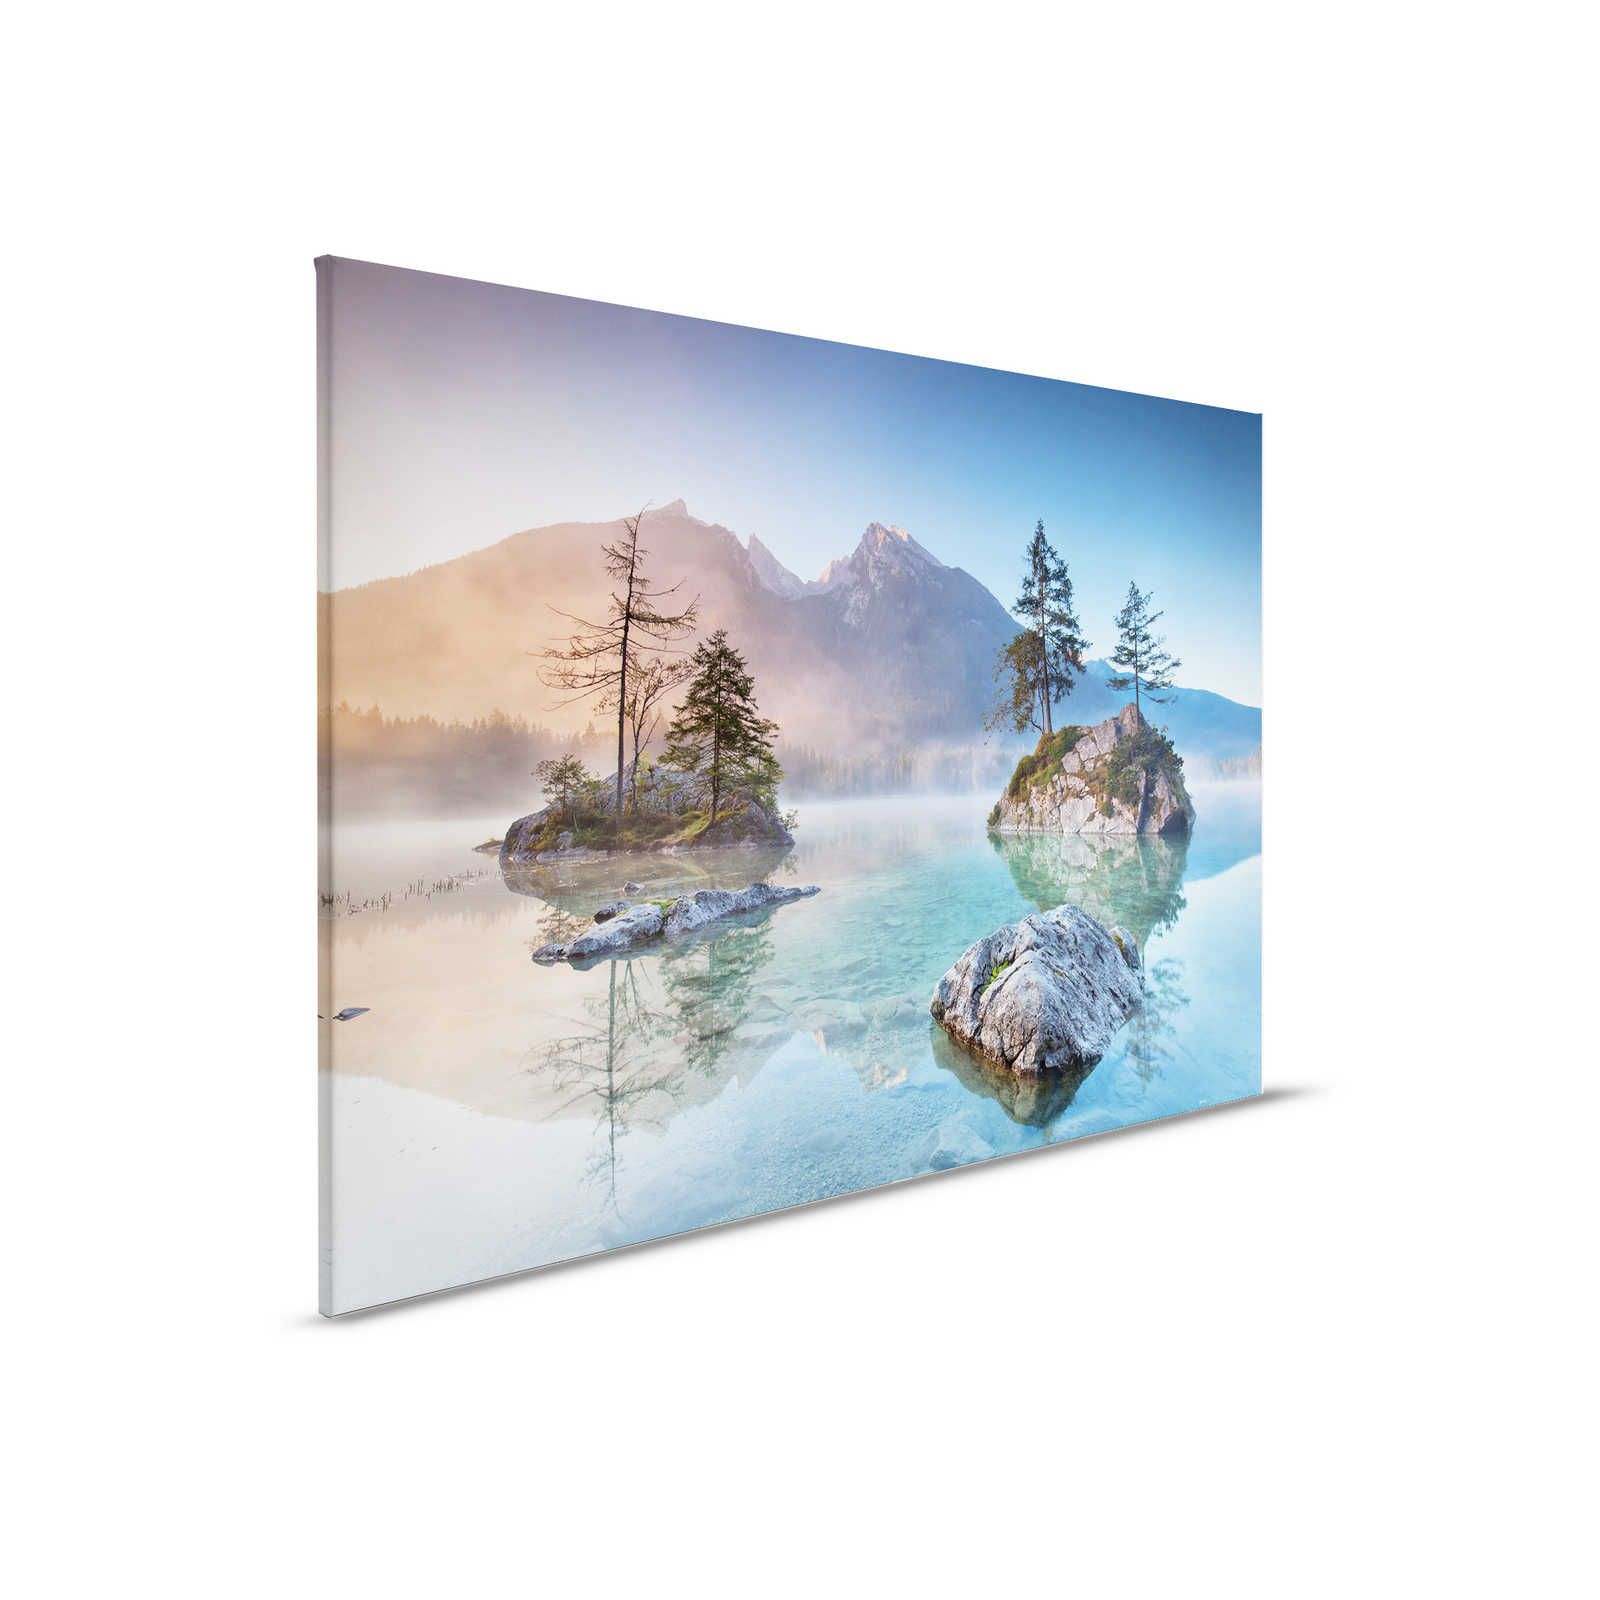         Canvas painting clear mountain lake with light mist - 0,90 m x 0,60 m
    